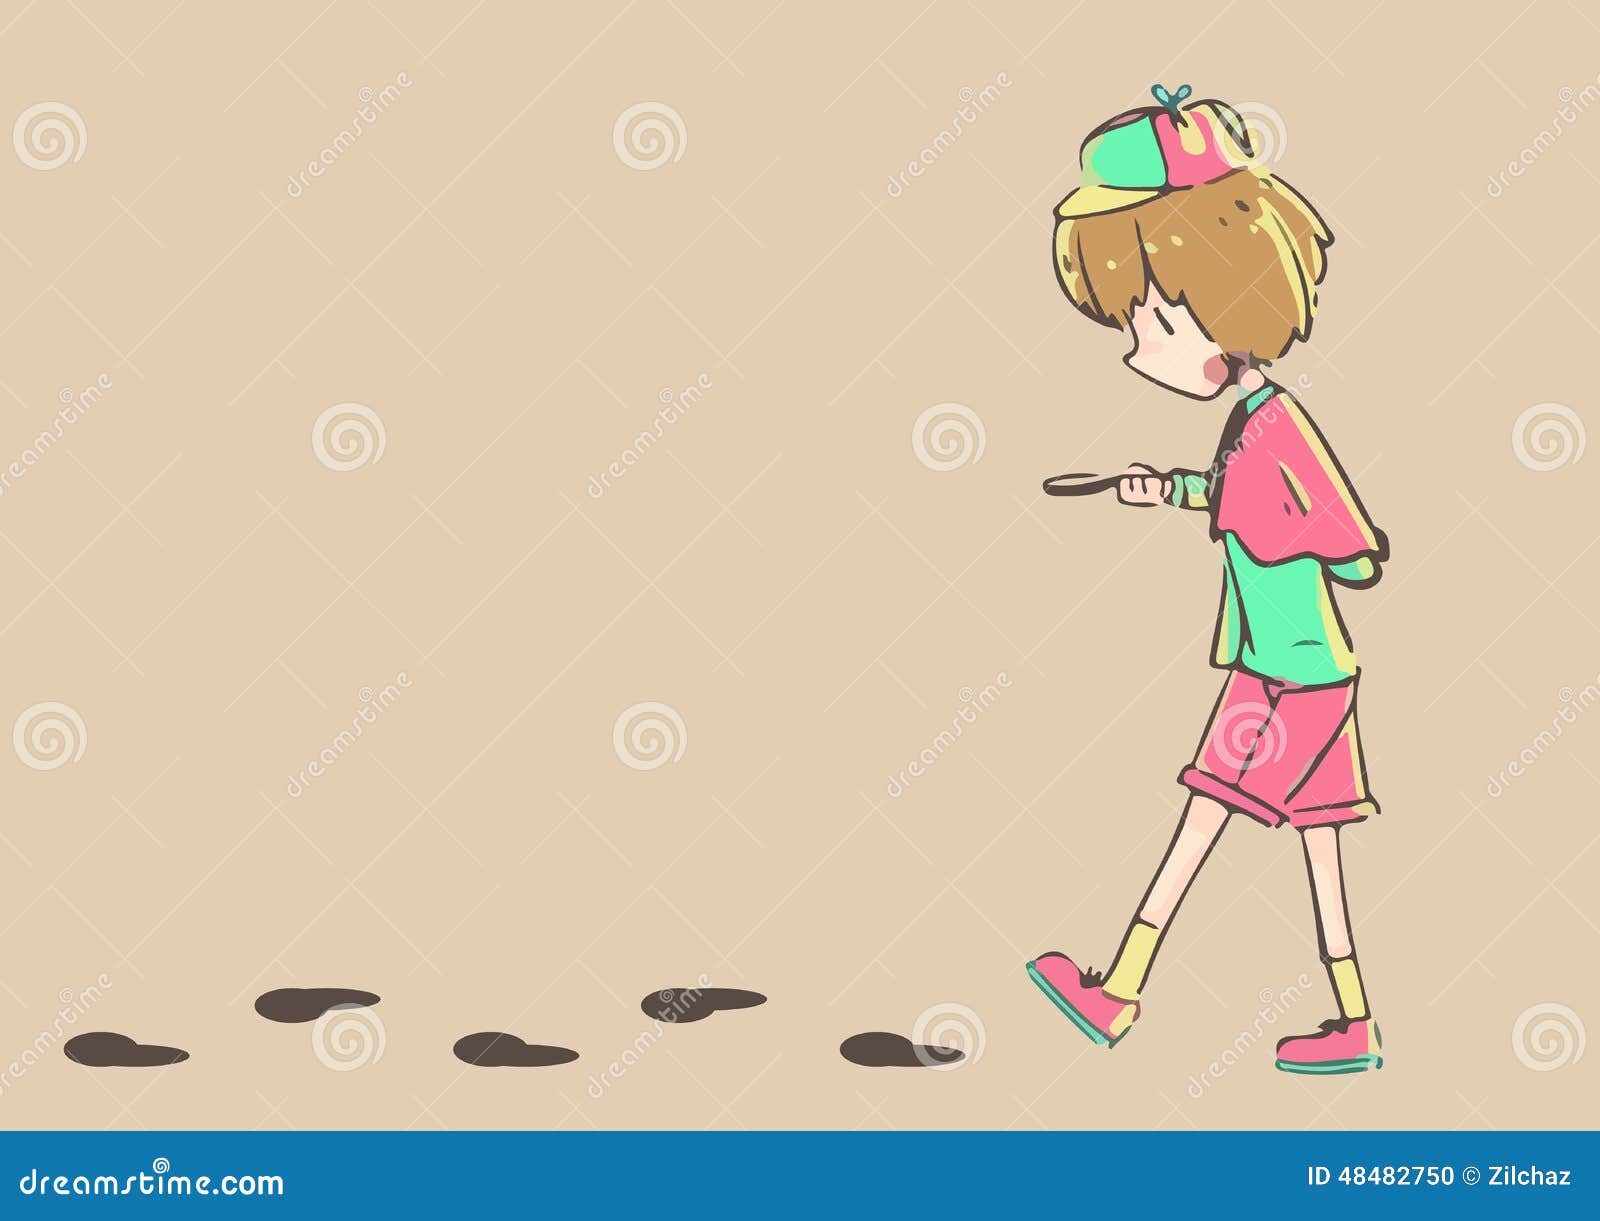 Detective Following The Footprint Stock Illustration - Image: 48482750